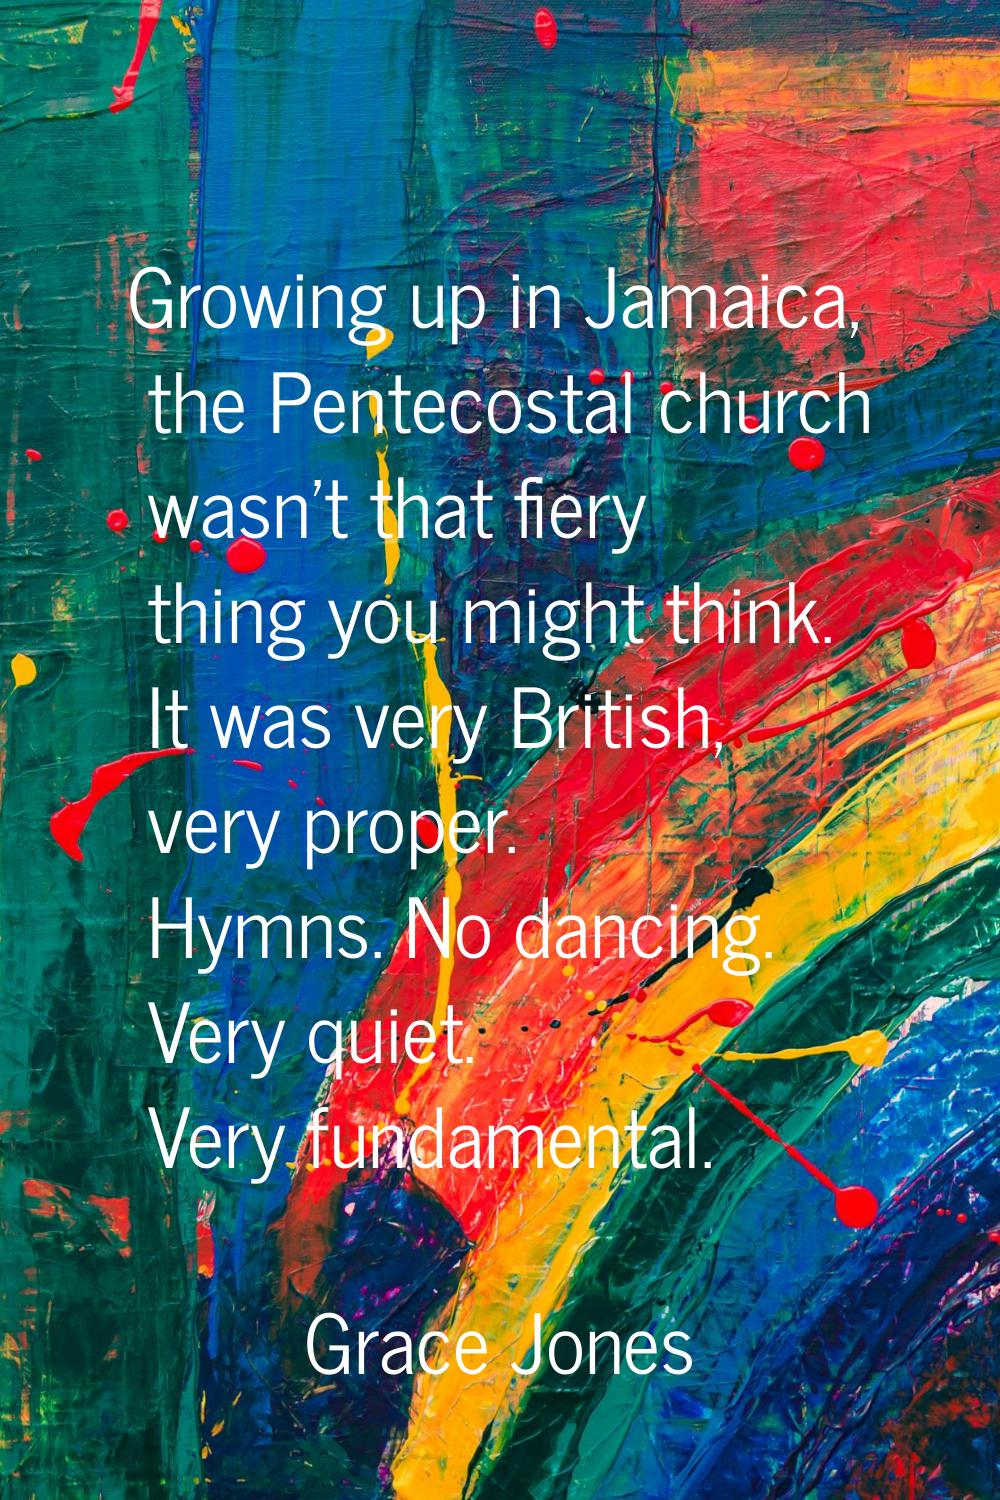 Growing up in Jamaica, the Pentecostal church wasn't that fiery thing you might think. It was very 